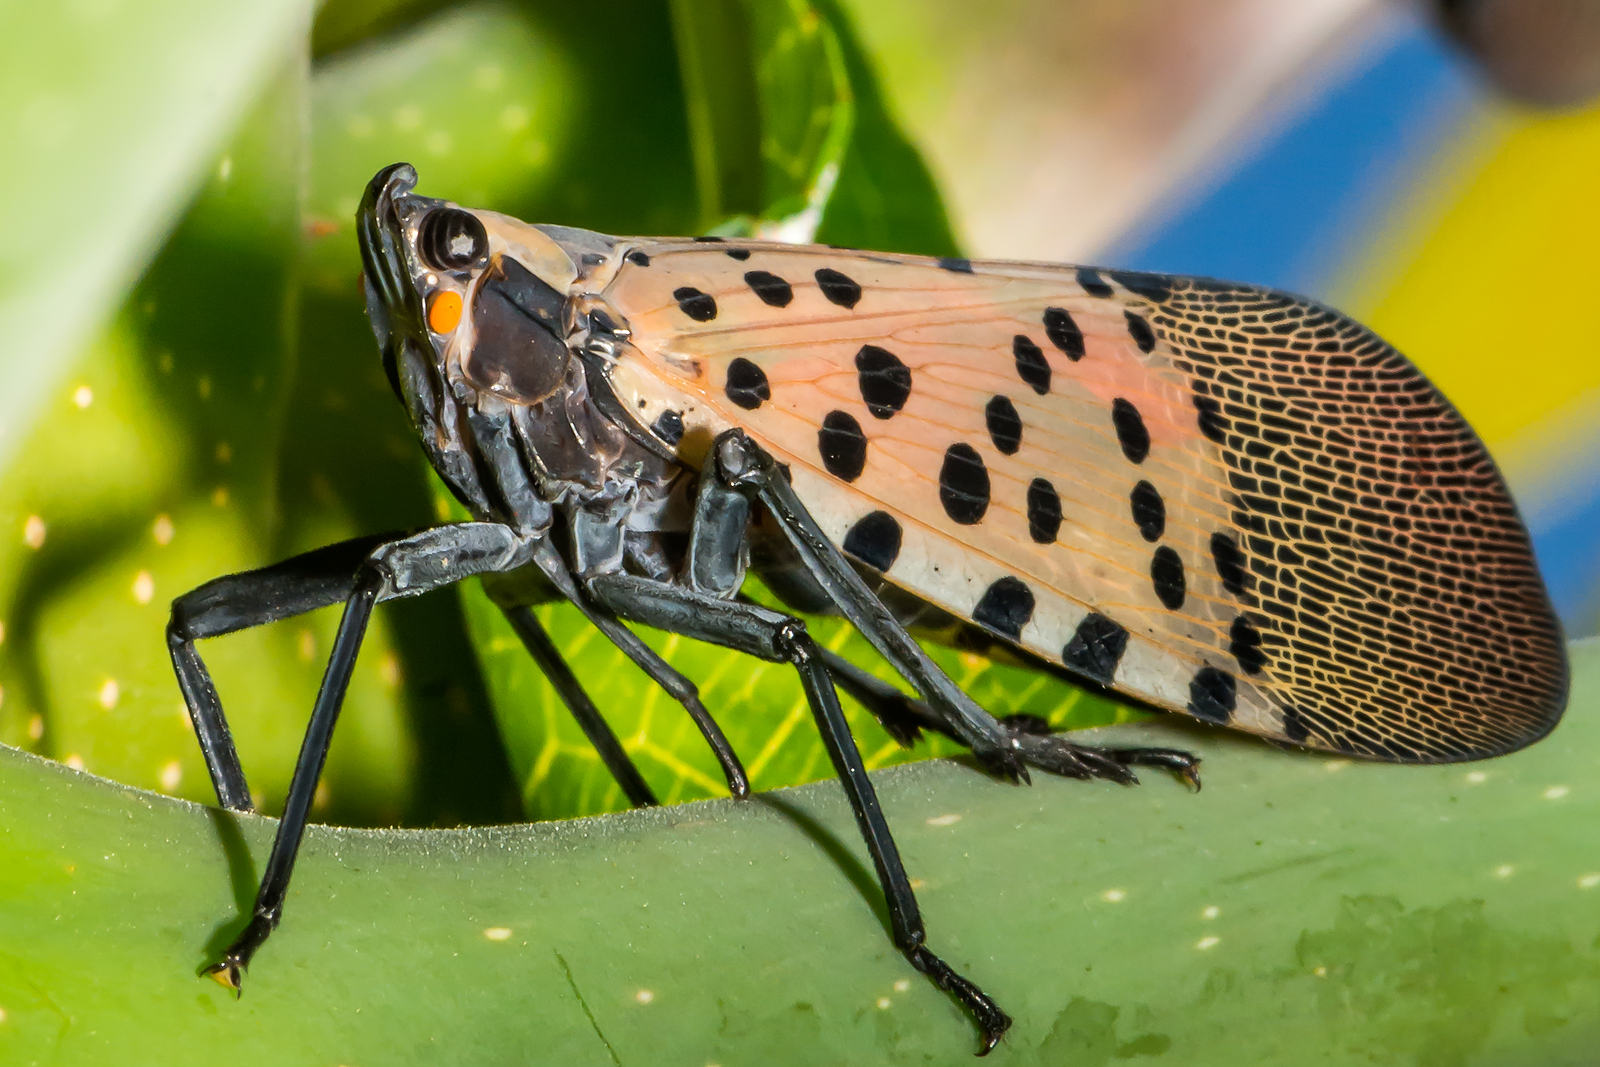 The spotted lanternfly is an attractive but invasive pest which, in large enough numbers, destroys plants, crops and trees.